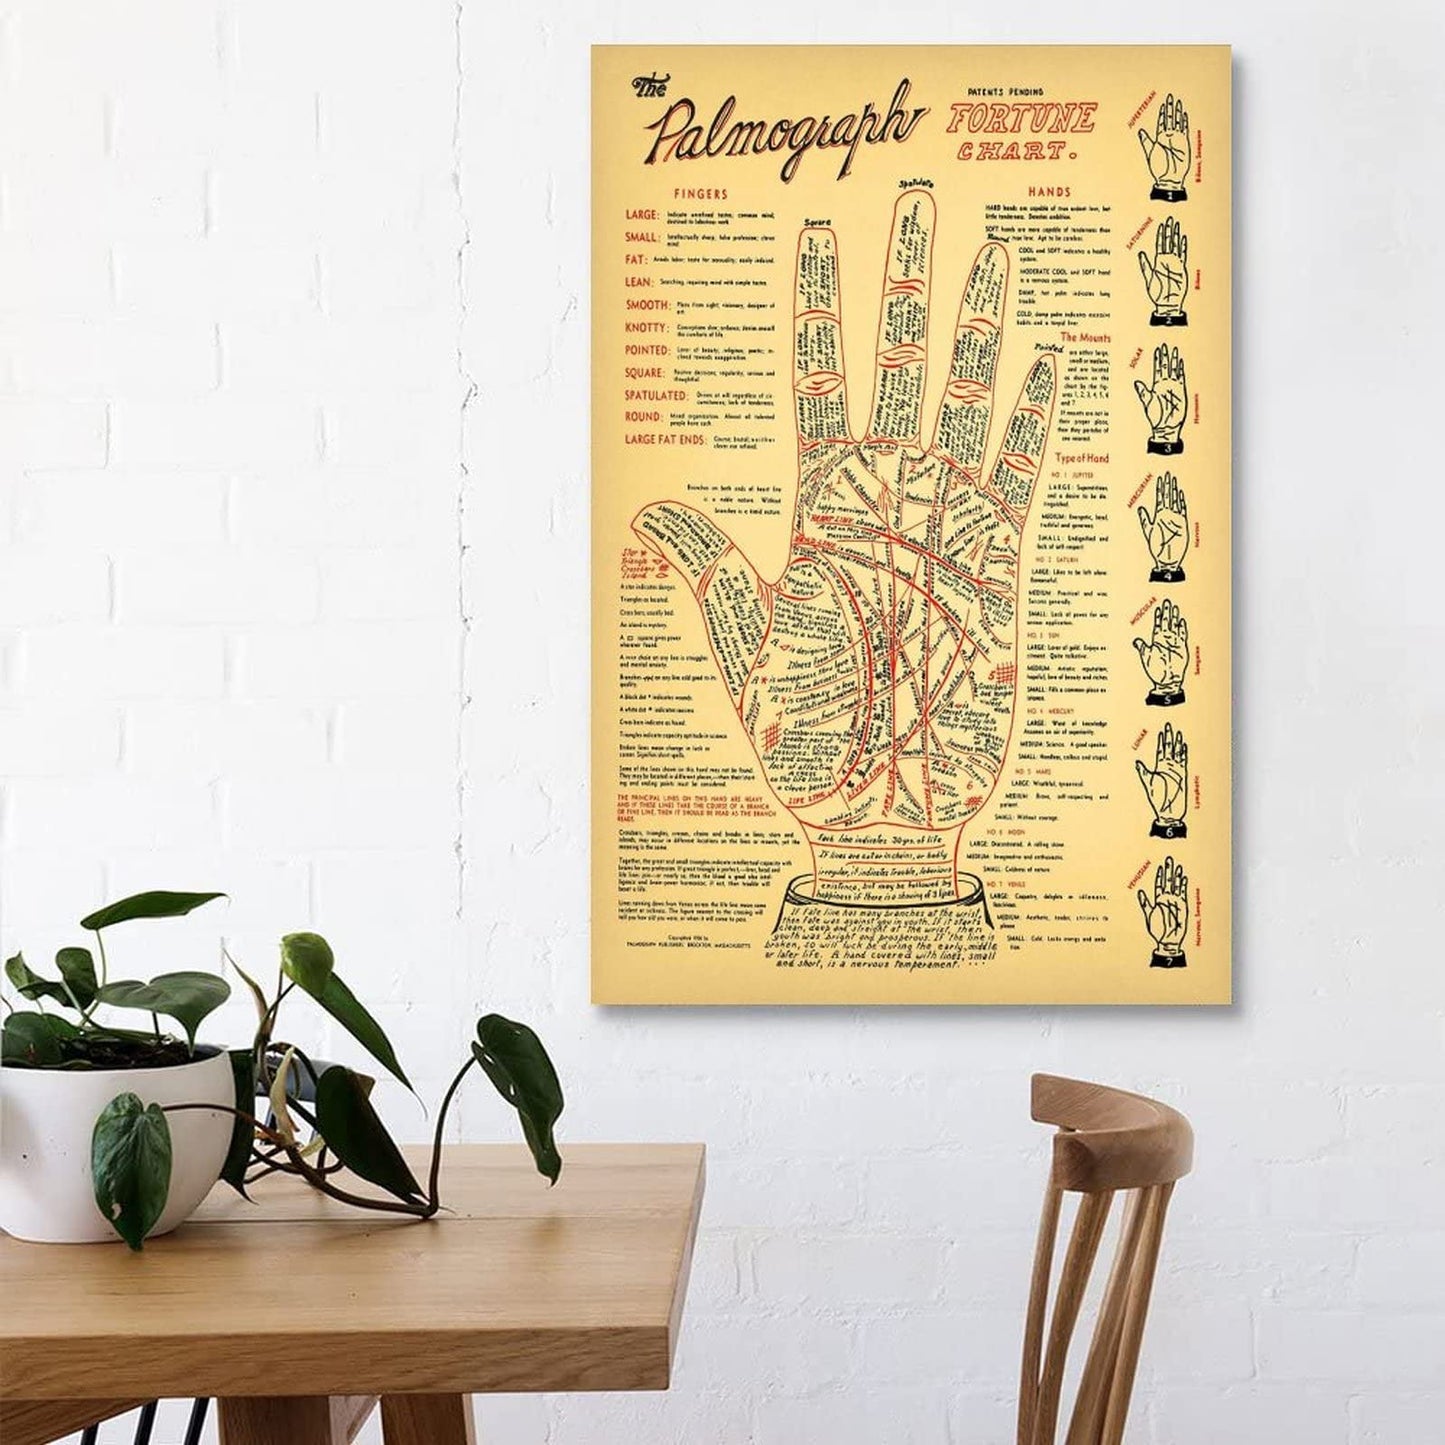 QFART Classic Poster Vintage Palmistry Chart 5 Sizes Fortune Telling Canvas Wall Art Poster Decorative Bedroom Modern Home Print Picture Artworks Posters UnFramed,08x12inch(20x30cm)